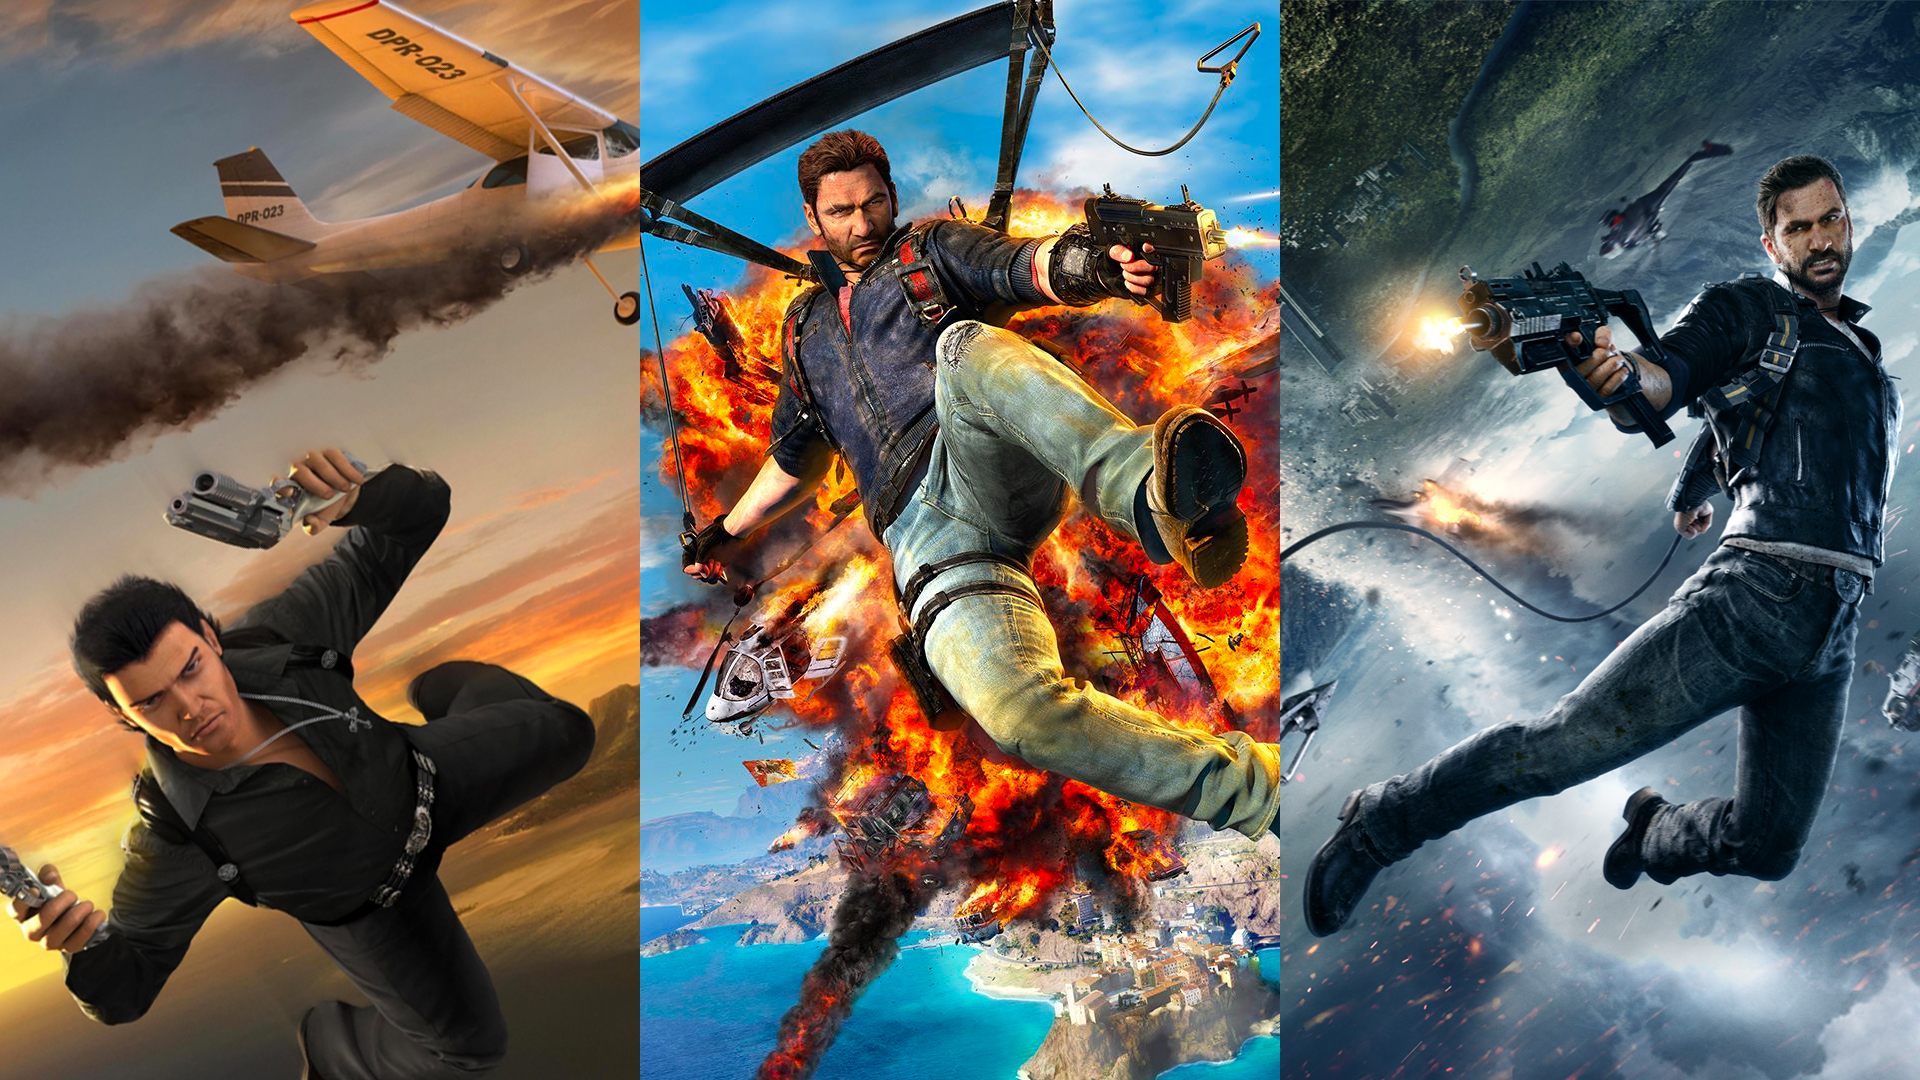 Play Just Cause 3 For Free This Weekend With Xbox Live Gold Images, Photos, Reviews